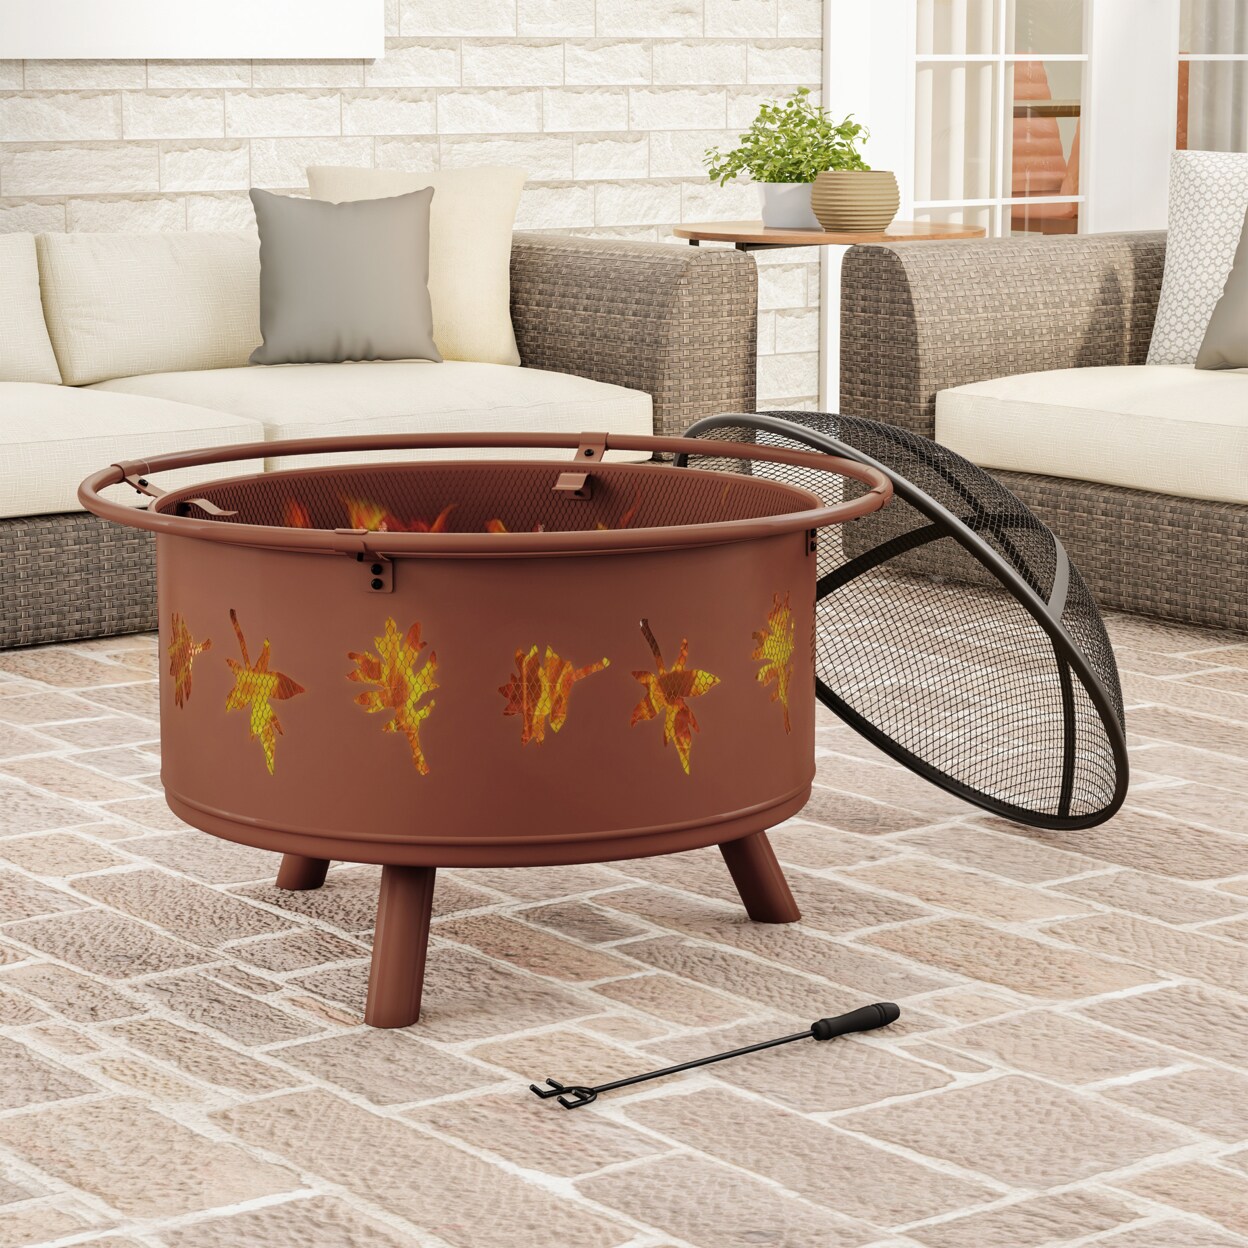 Pure Garden Outdoor Deep Fire Pit- Round Large Steel Bowl with Leaf Cutouts Mesh Spark Screen Log Poker and Storage Cover